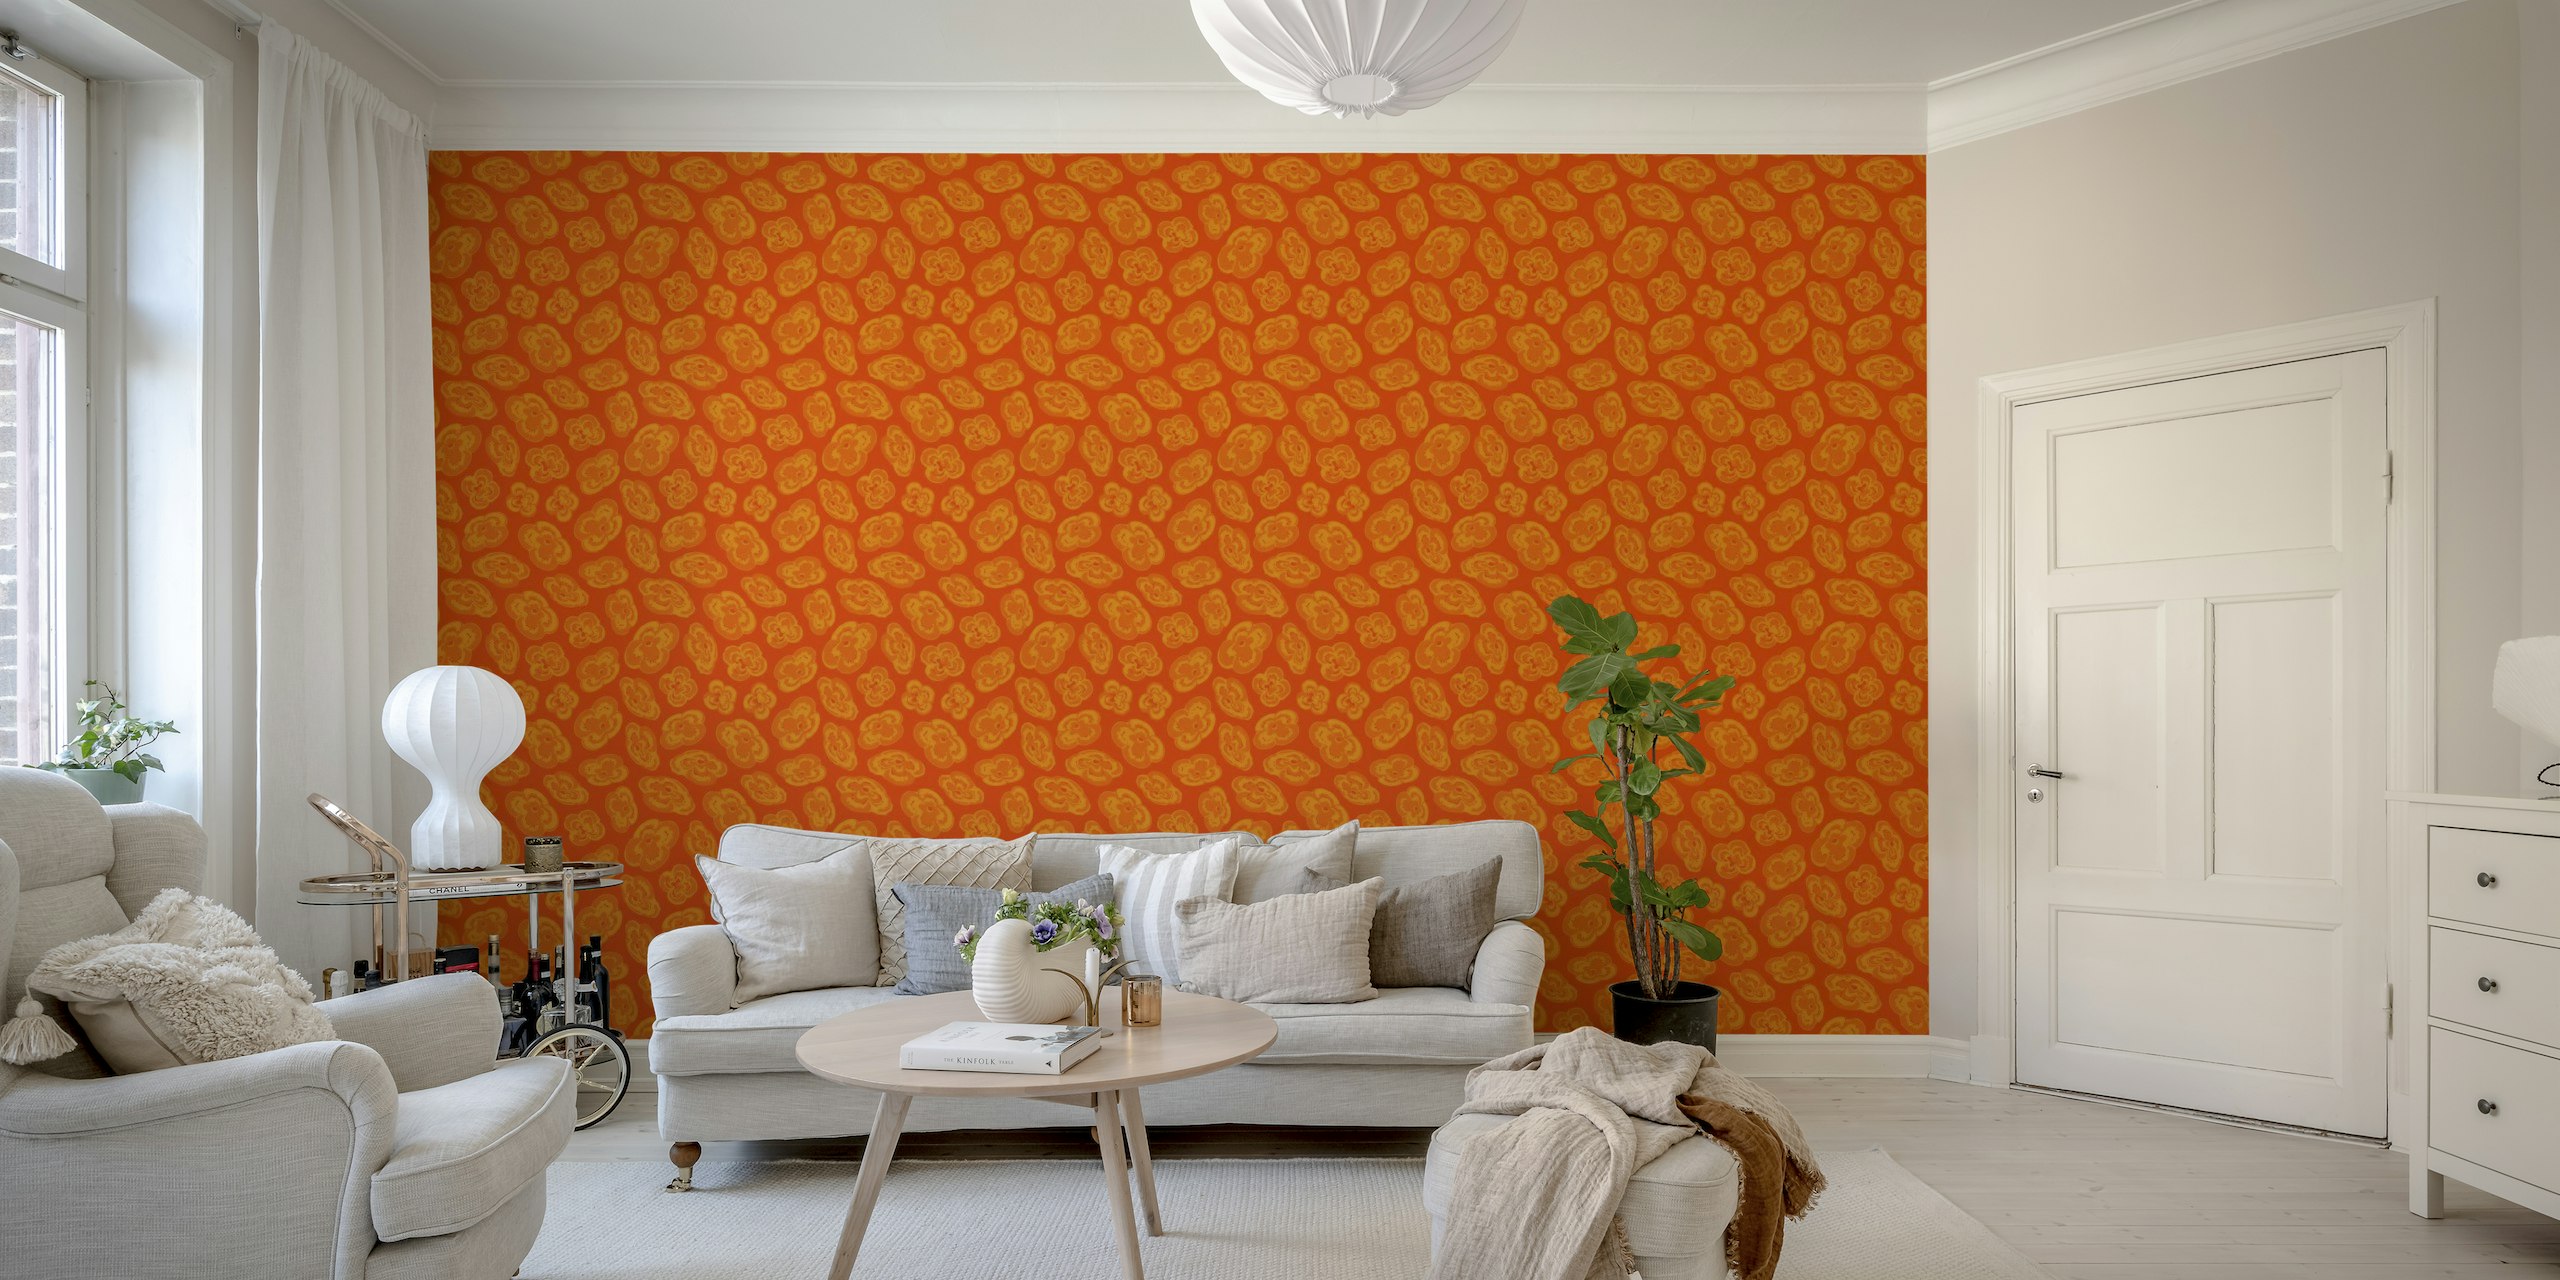 FLOATING LILIES Abstract Floral - Orange behang